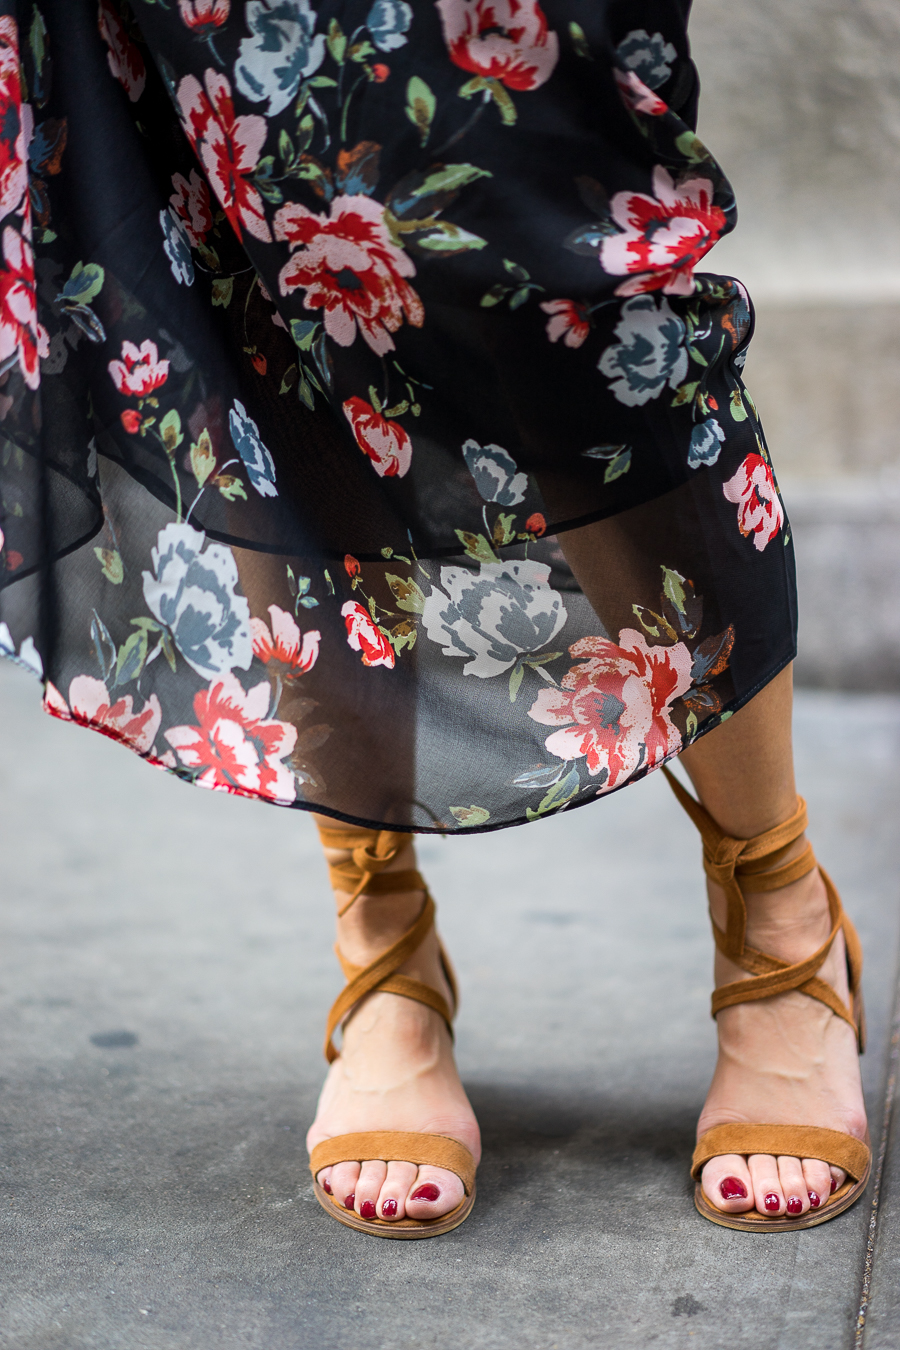 a-glam-lifestyle-blogger, zara-floral-maxi-dress, steve-madden-lace-up-sandals, new-york-fashion-week-outfit